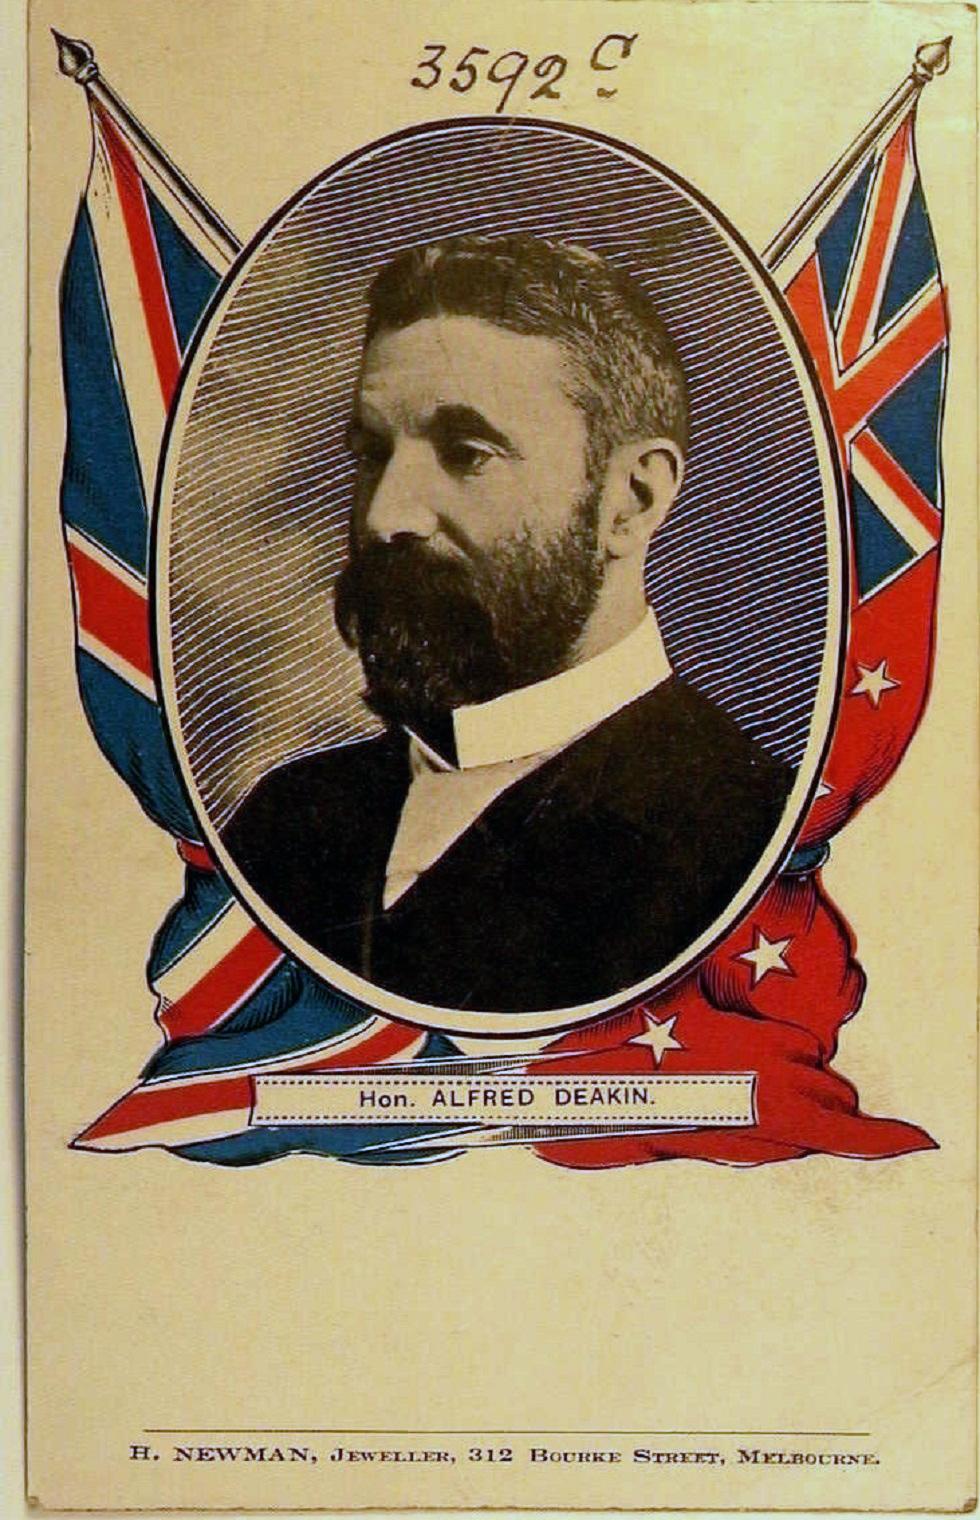 This prime ministerial postcard shows the Union Jack